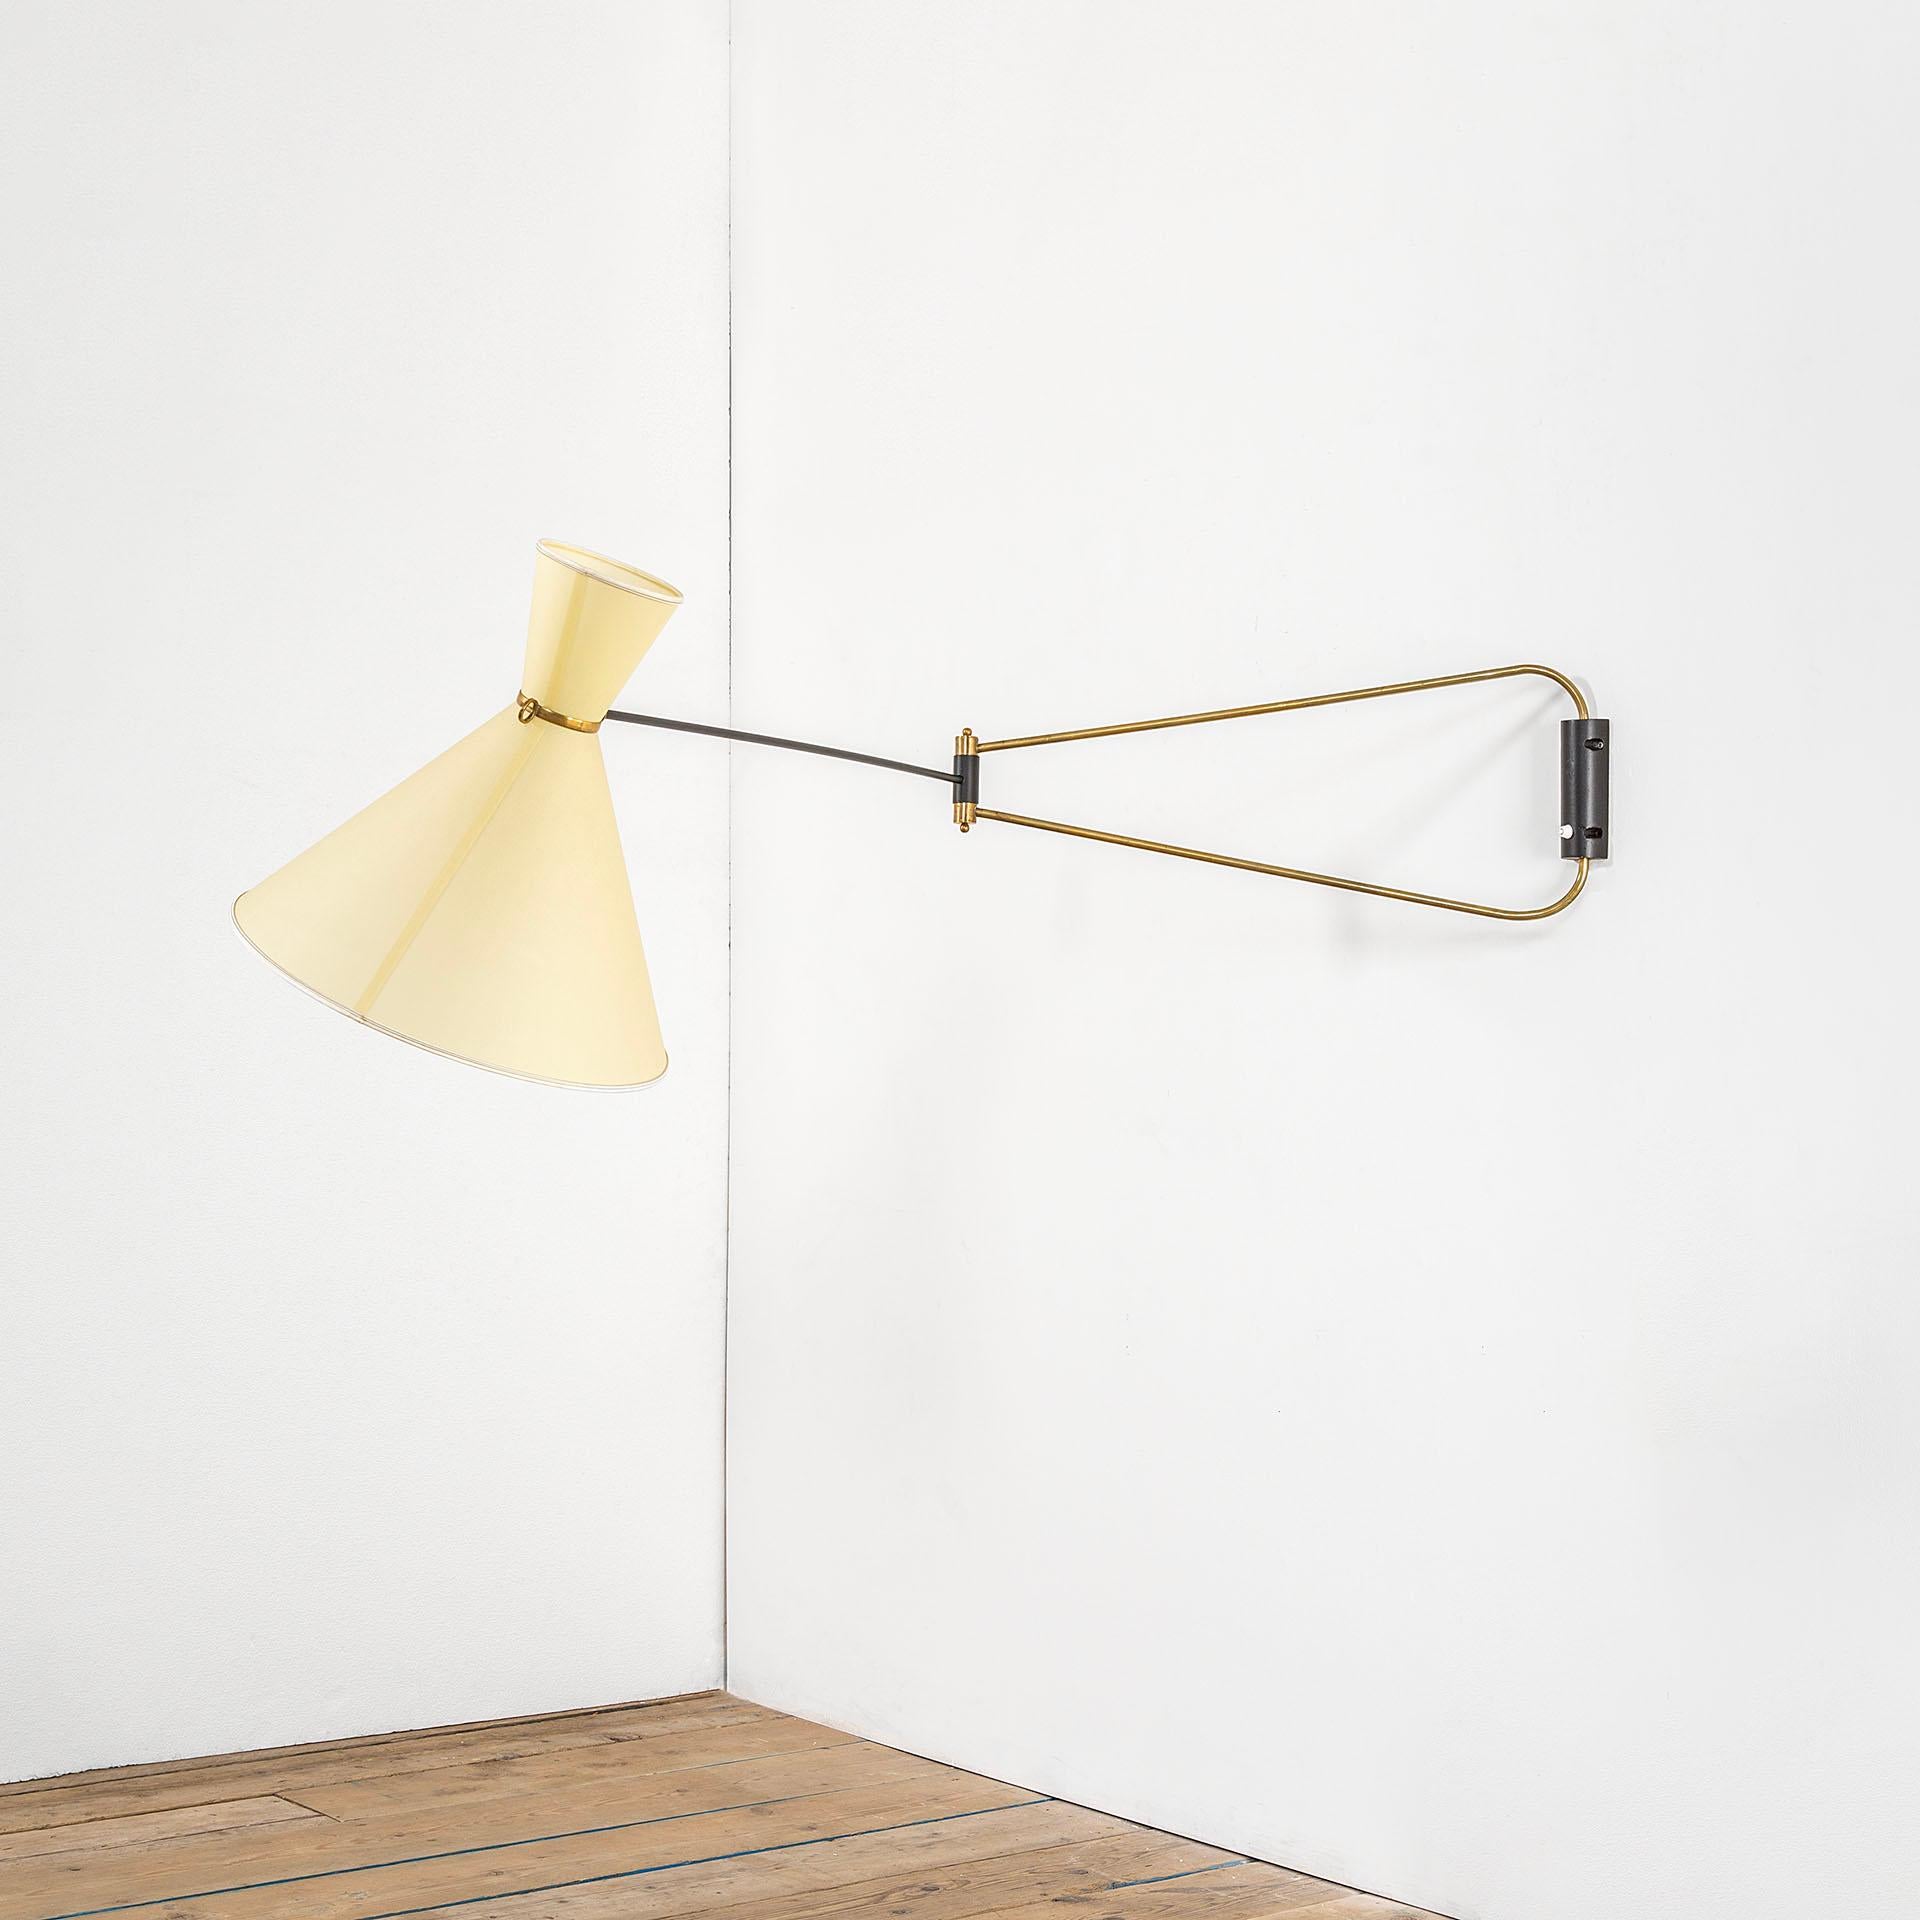 20th Century Robert Mathieu Directionable Wall Lamp in Brass and Fabric, 60s For Sale 1